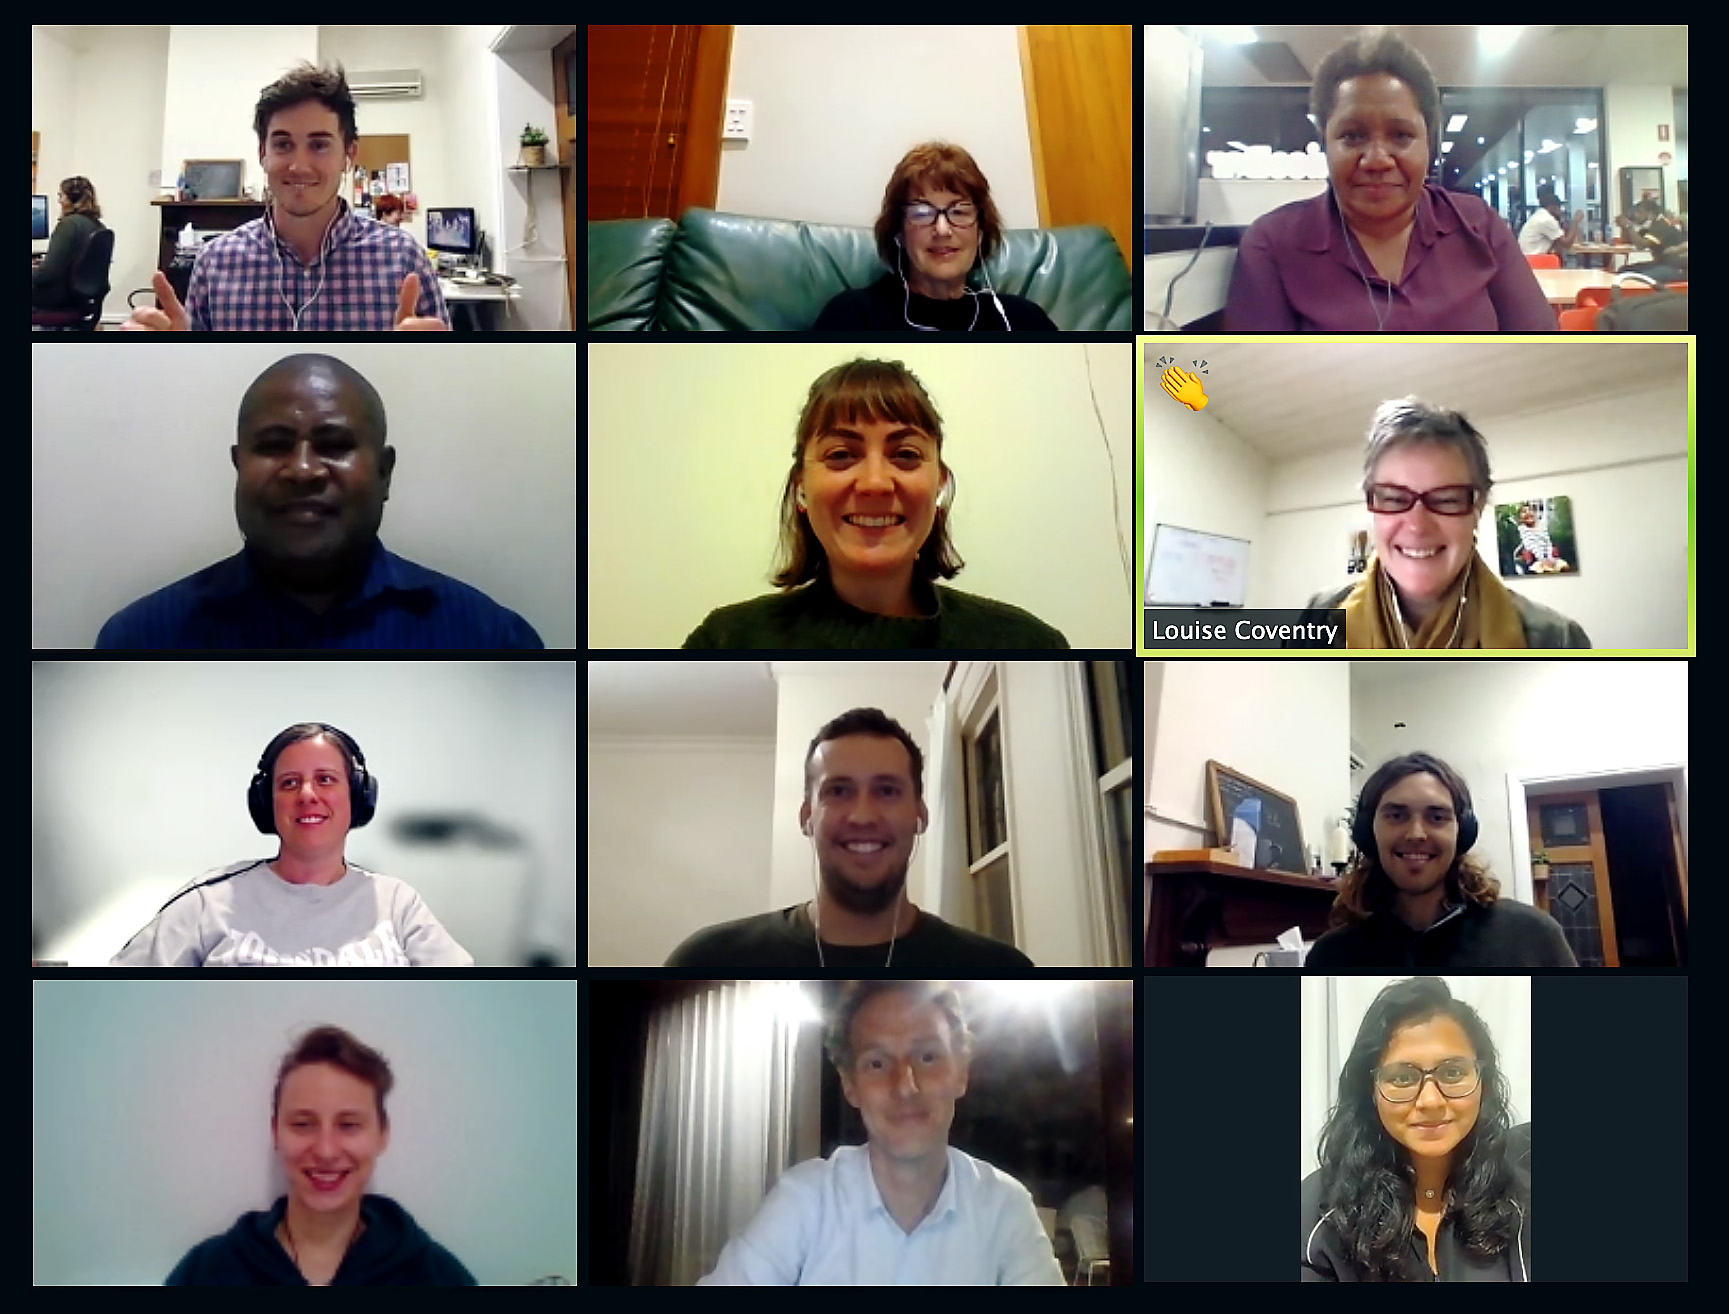 12 people on a video call smiling at the camera.